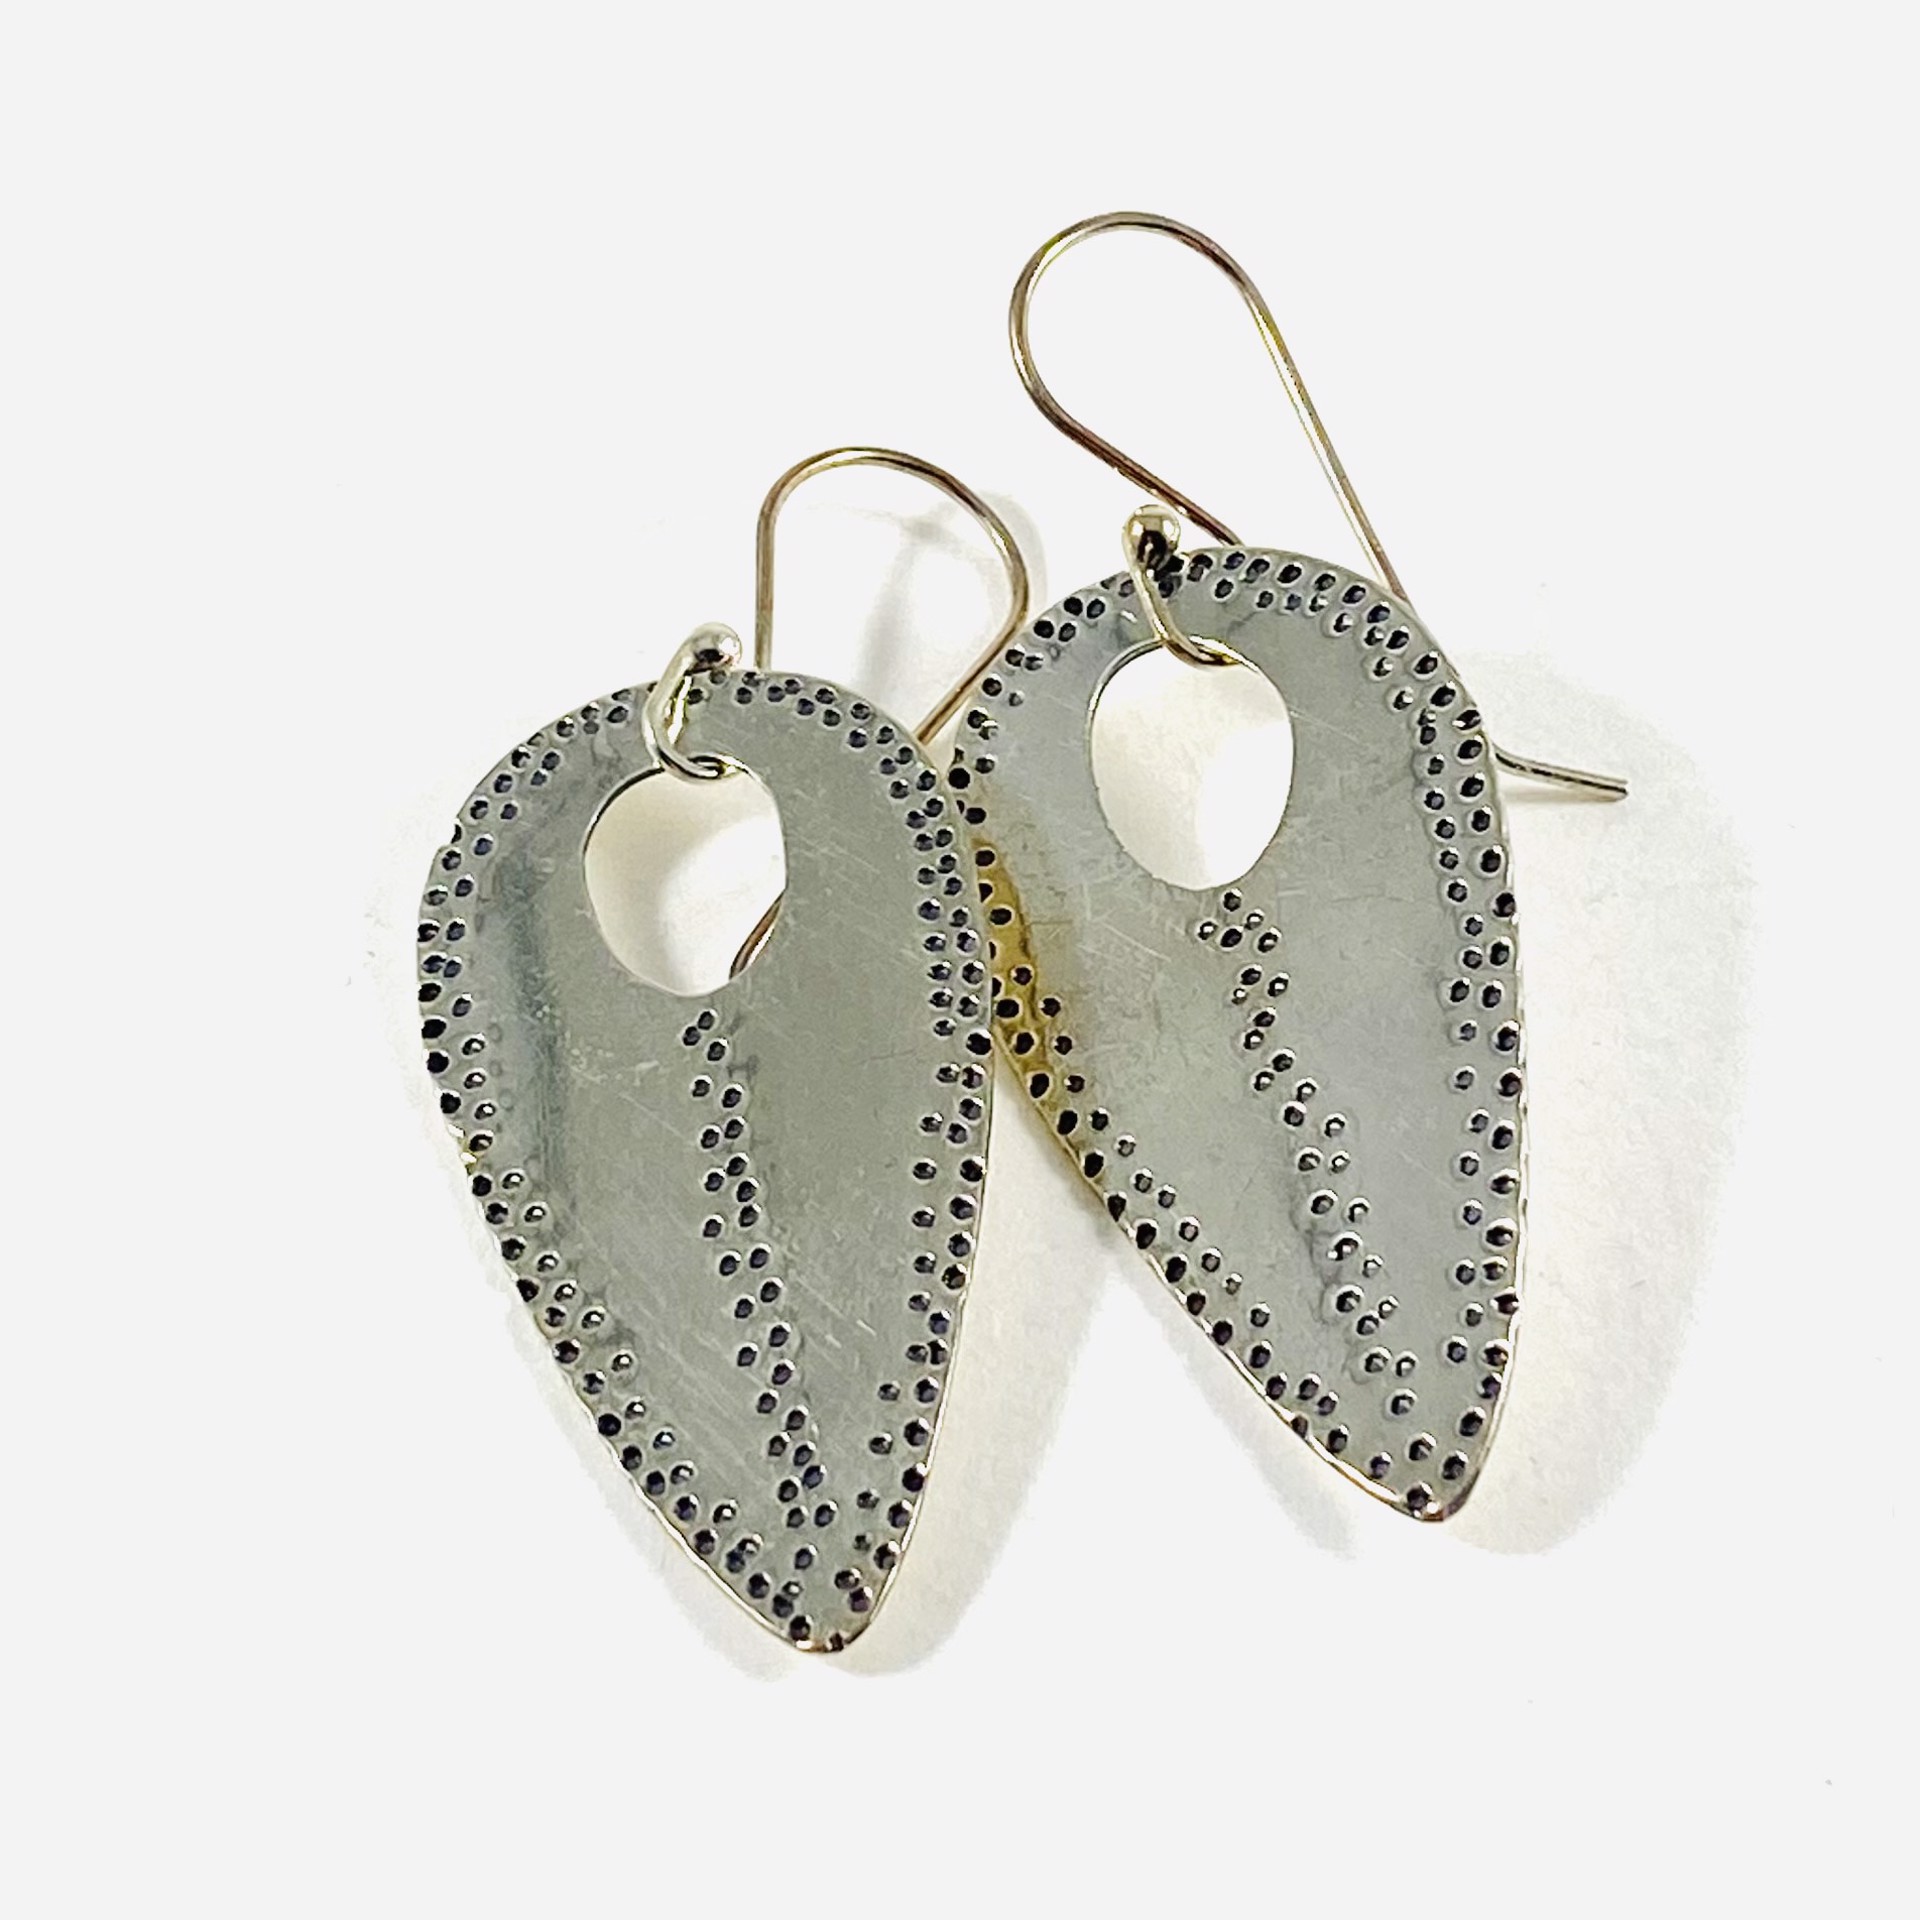 #76 Hand Stamped Texture Sterling Earrings by Anne Bivens